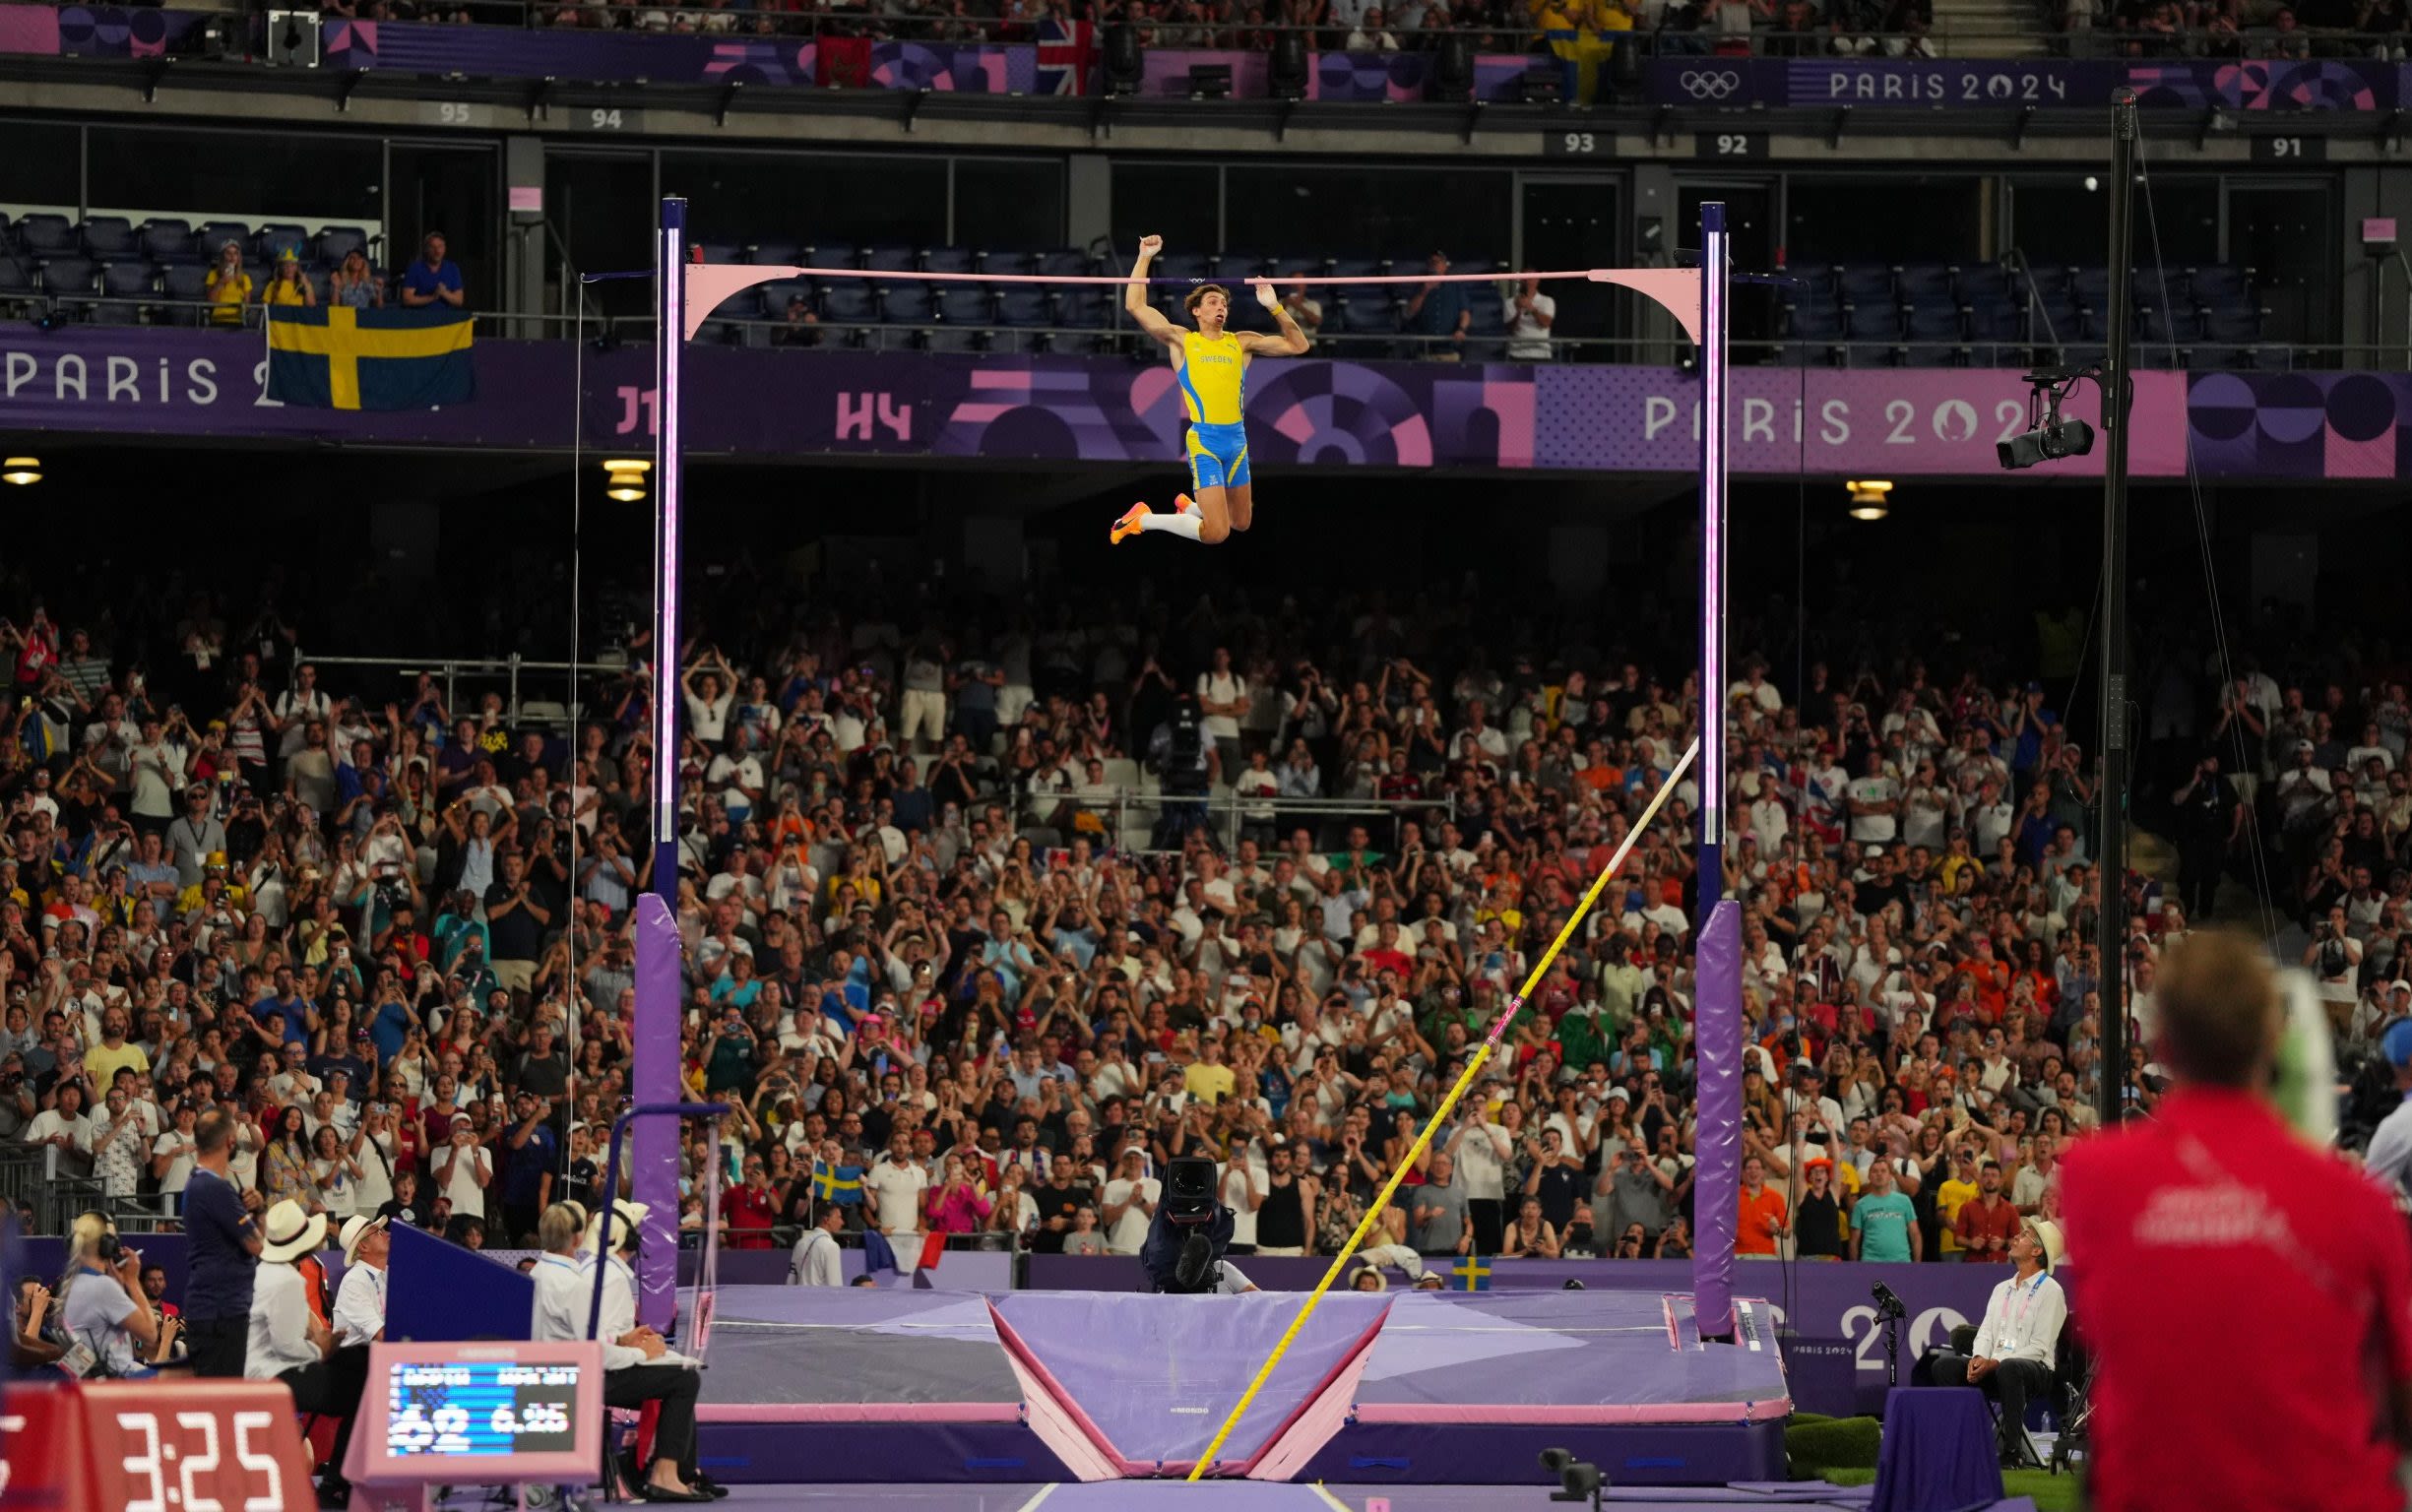 Pictured: The most impressive world record of the Olympic Games – Armand Duplantis in the pole vault